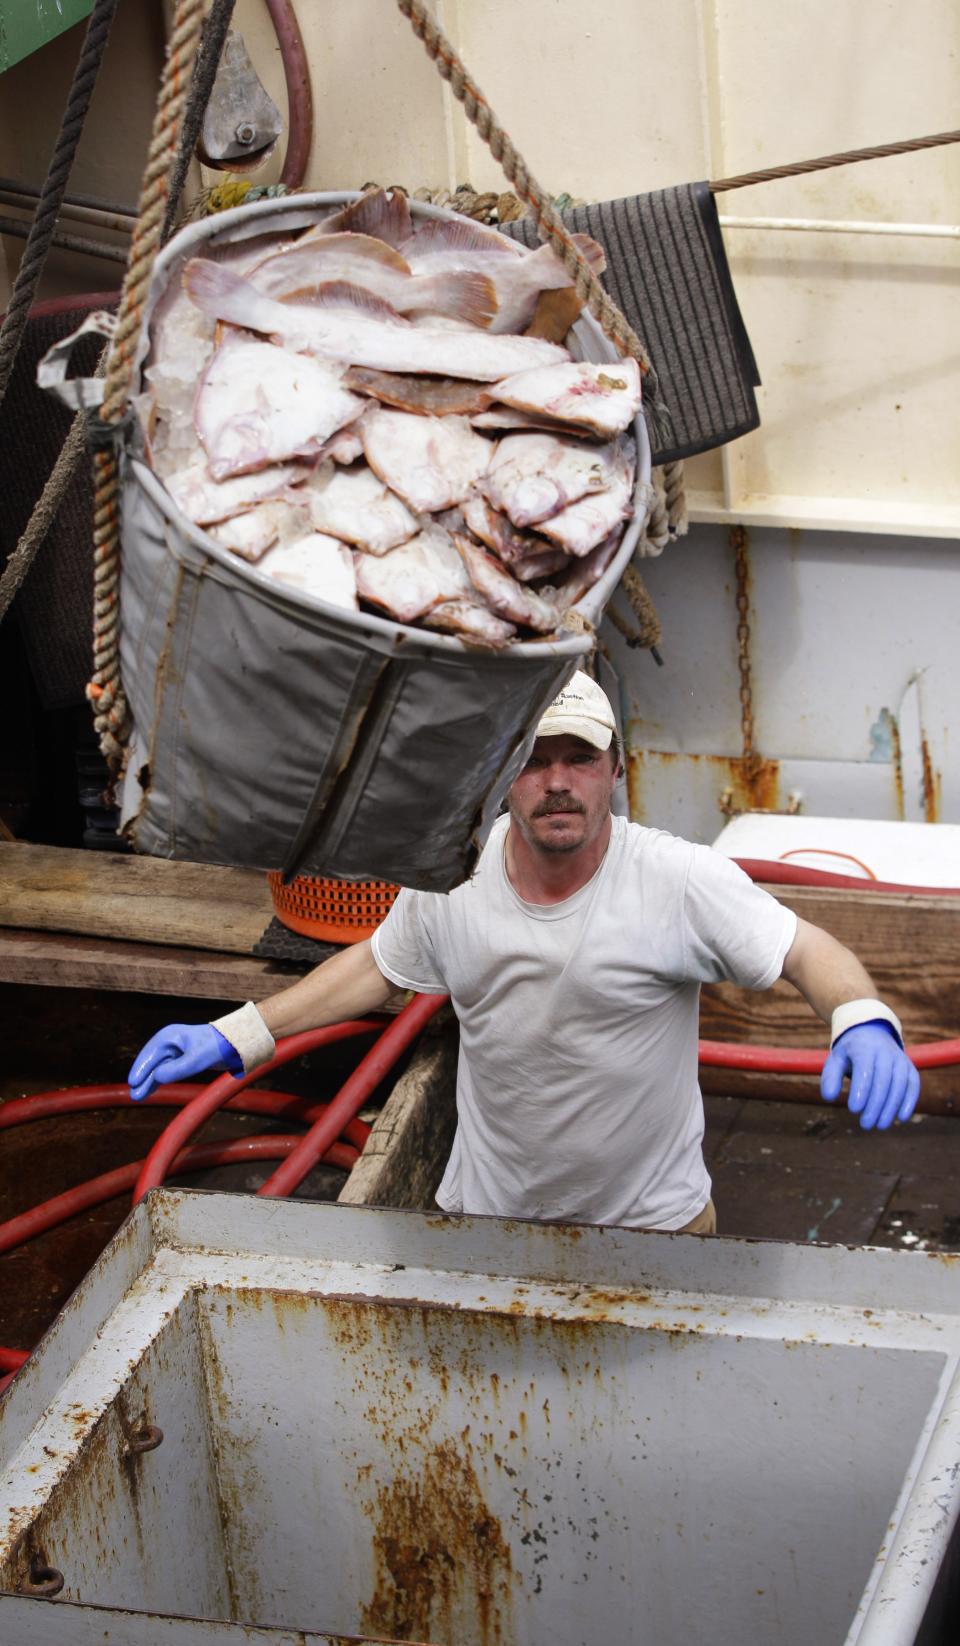 FILE - This May 14, 2012 file photograph shows crewman Jeremy Prior offloading flounder from a fishing boat in New Bedford, Mass., Monday, May 14, 2012. The U.S. seafood catch reached a 17-year high in 2011, with all fishing regions of the country showing increases in both the volume and value of their harvests. New Bedford, Mass., had the highest-valued catch for the 12th straight year, due largely to its scallop fishery. (AP Photo/Stephan Savoia)